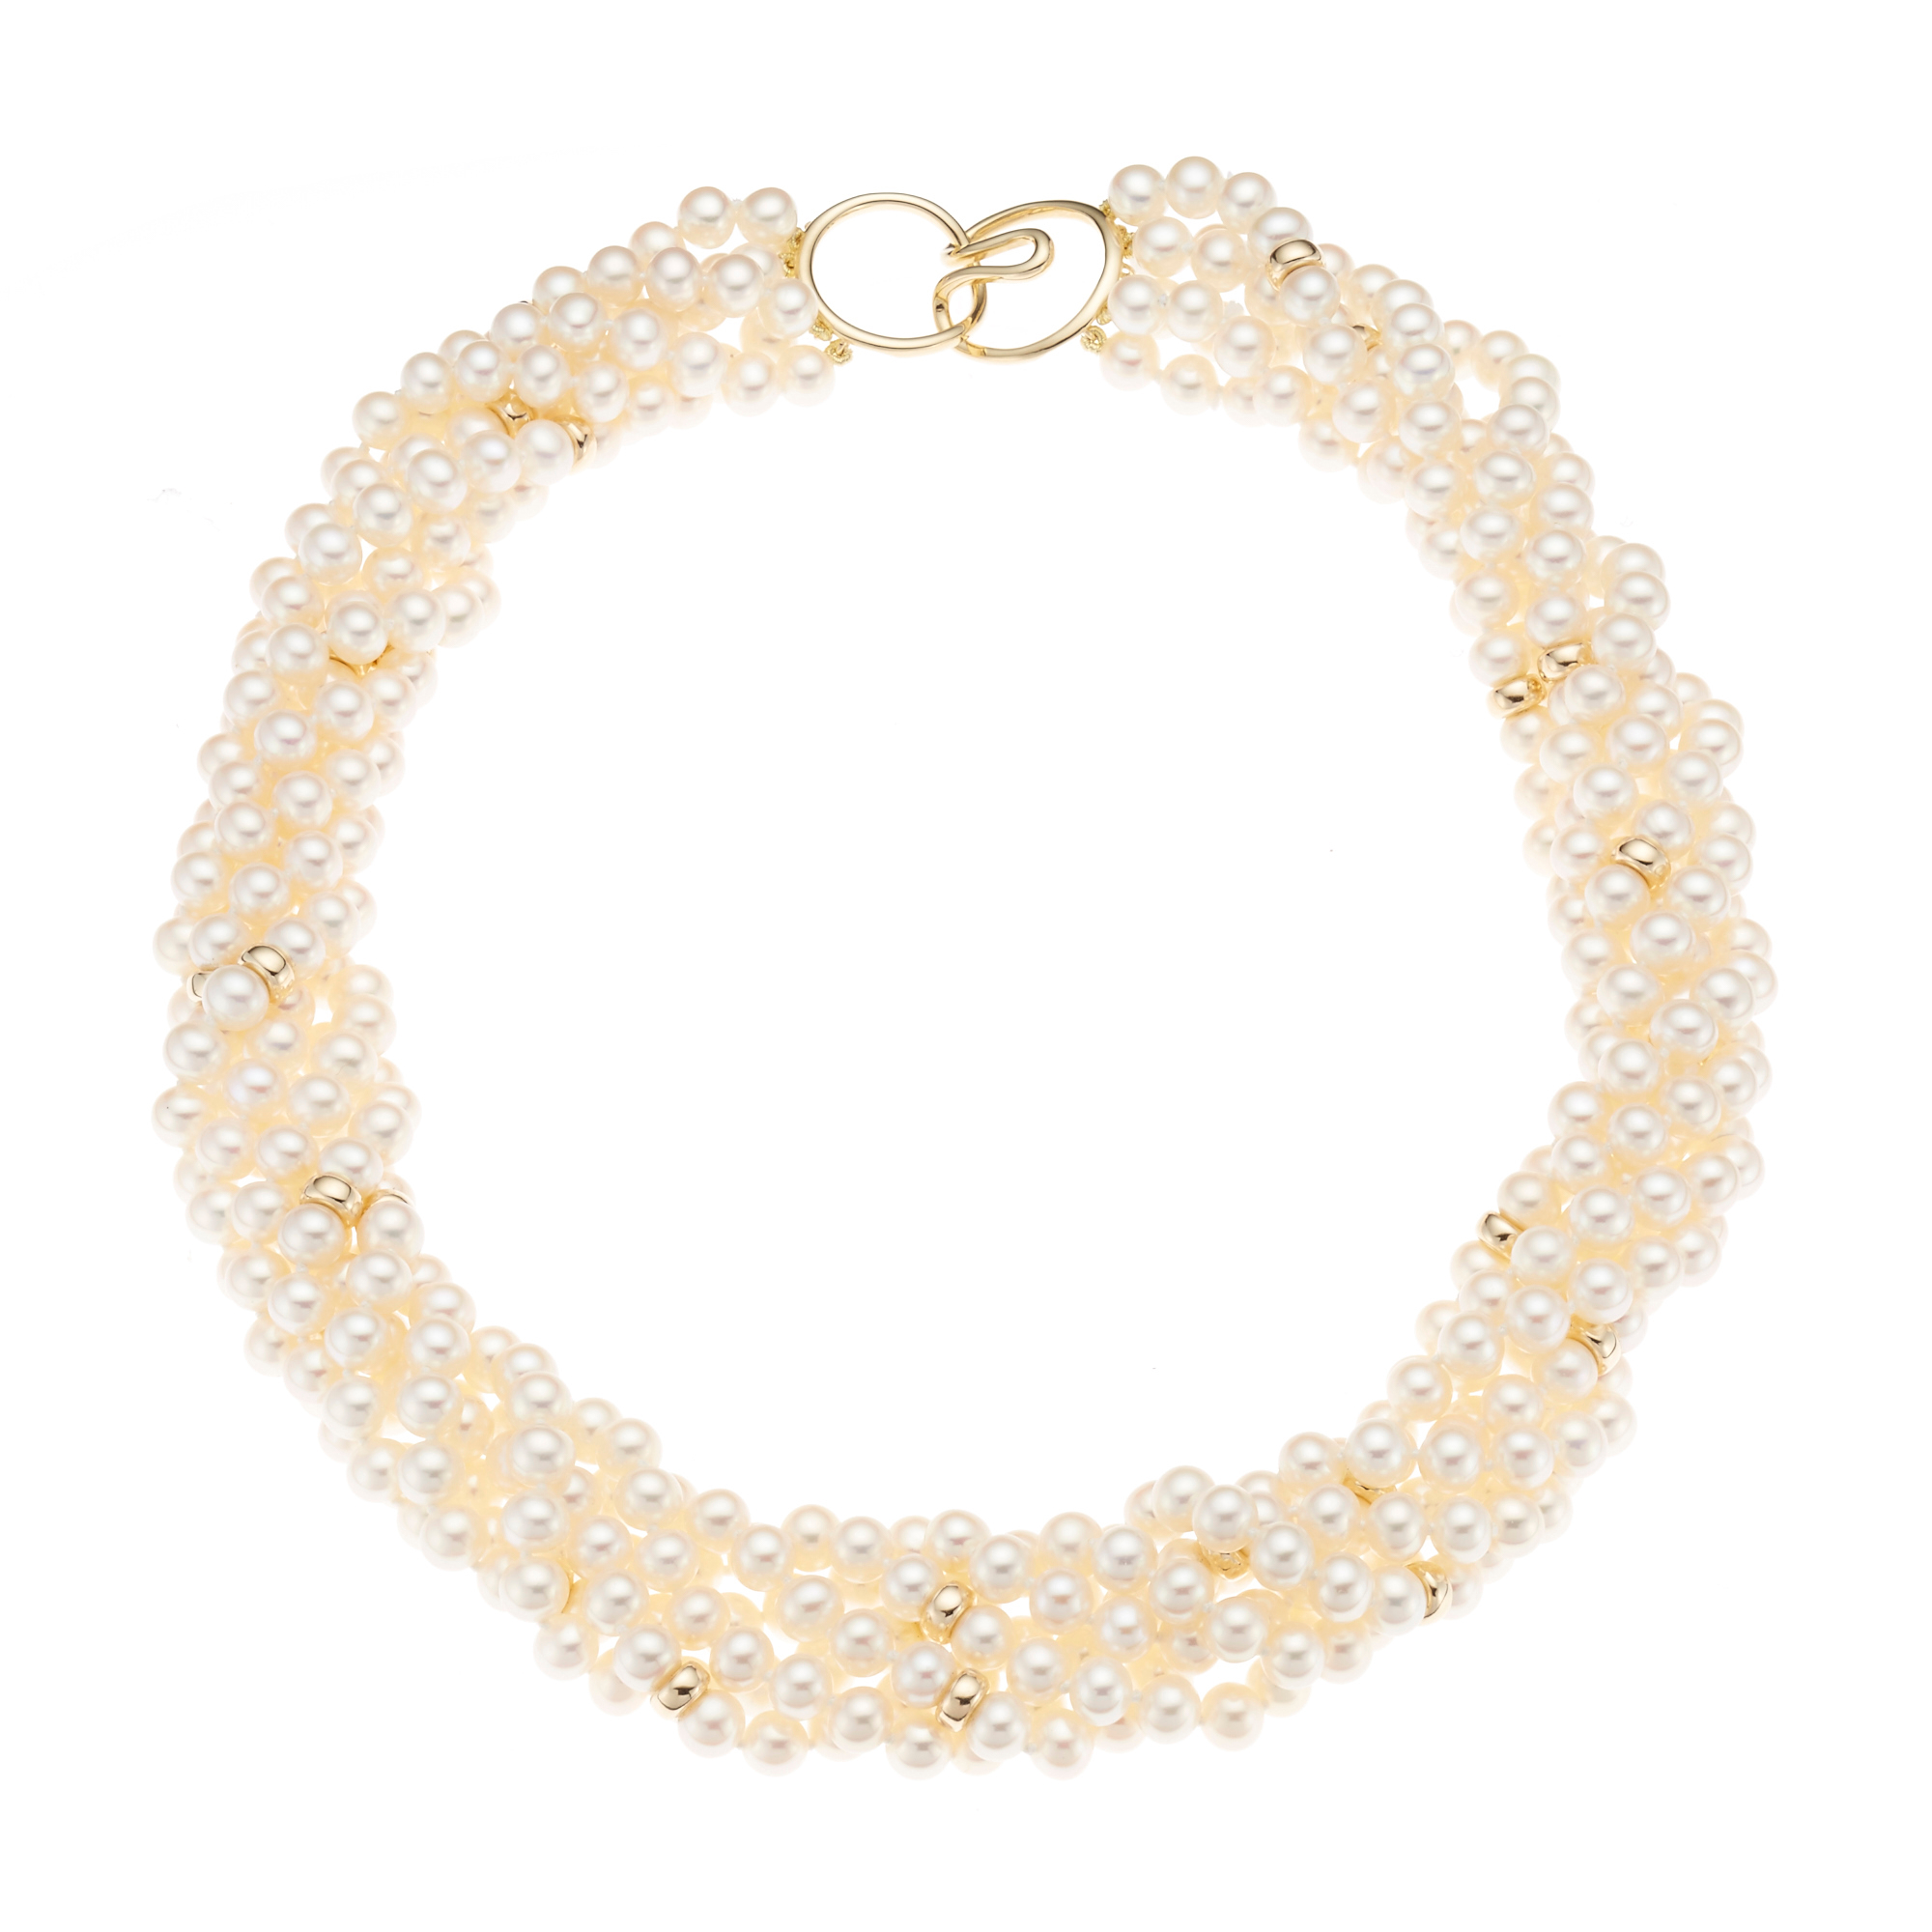 Gump's Six Strand Round Pearl Twist Necklace | Gump's